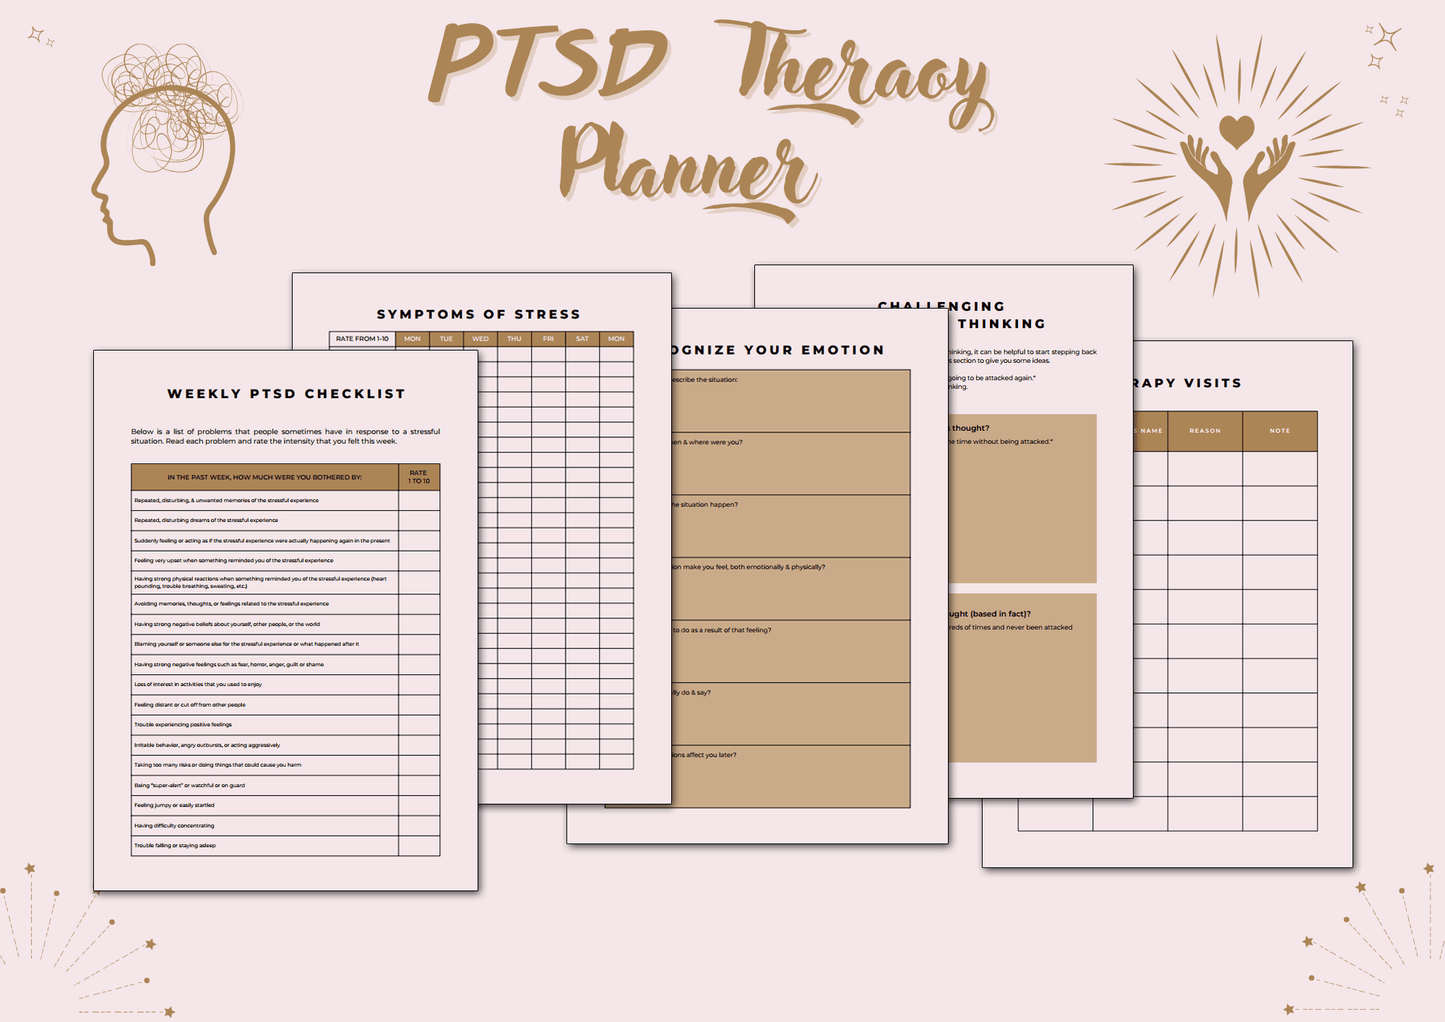 PTSD Therapy Planner